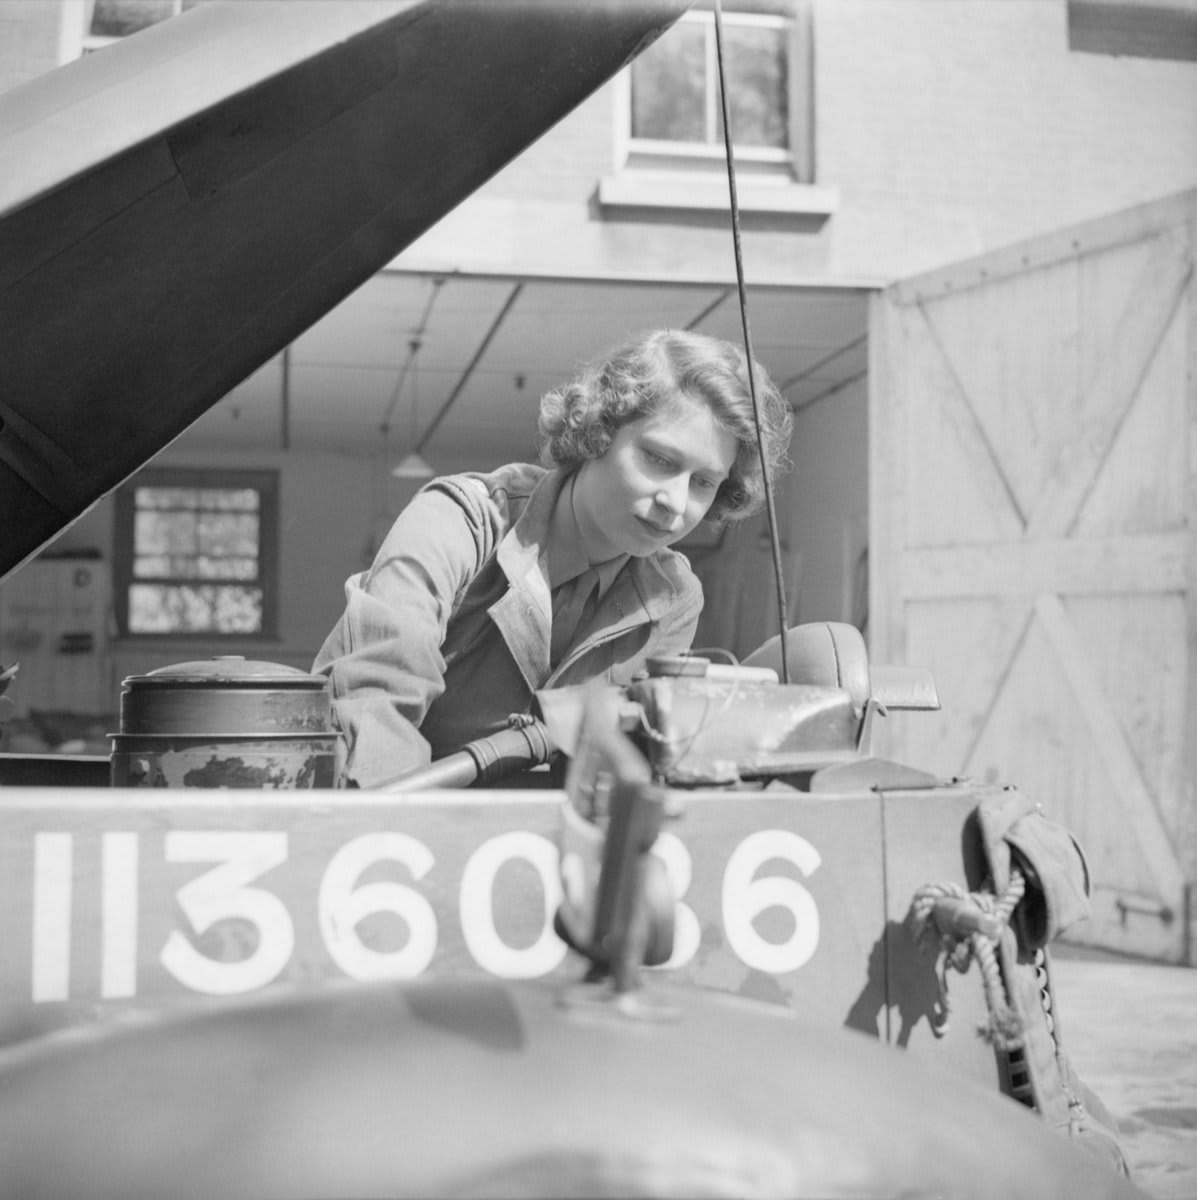 Here a young Princess Elizabeth is pictured removing the spark plugs from a vehicle as part of her training in the Auxiliary Territorial Service (ATS), 10 April 1945. PlatinumParty Learn more about the role of the ATS: https://t.co/CBPXeLIs01 © IWM H 41670